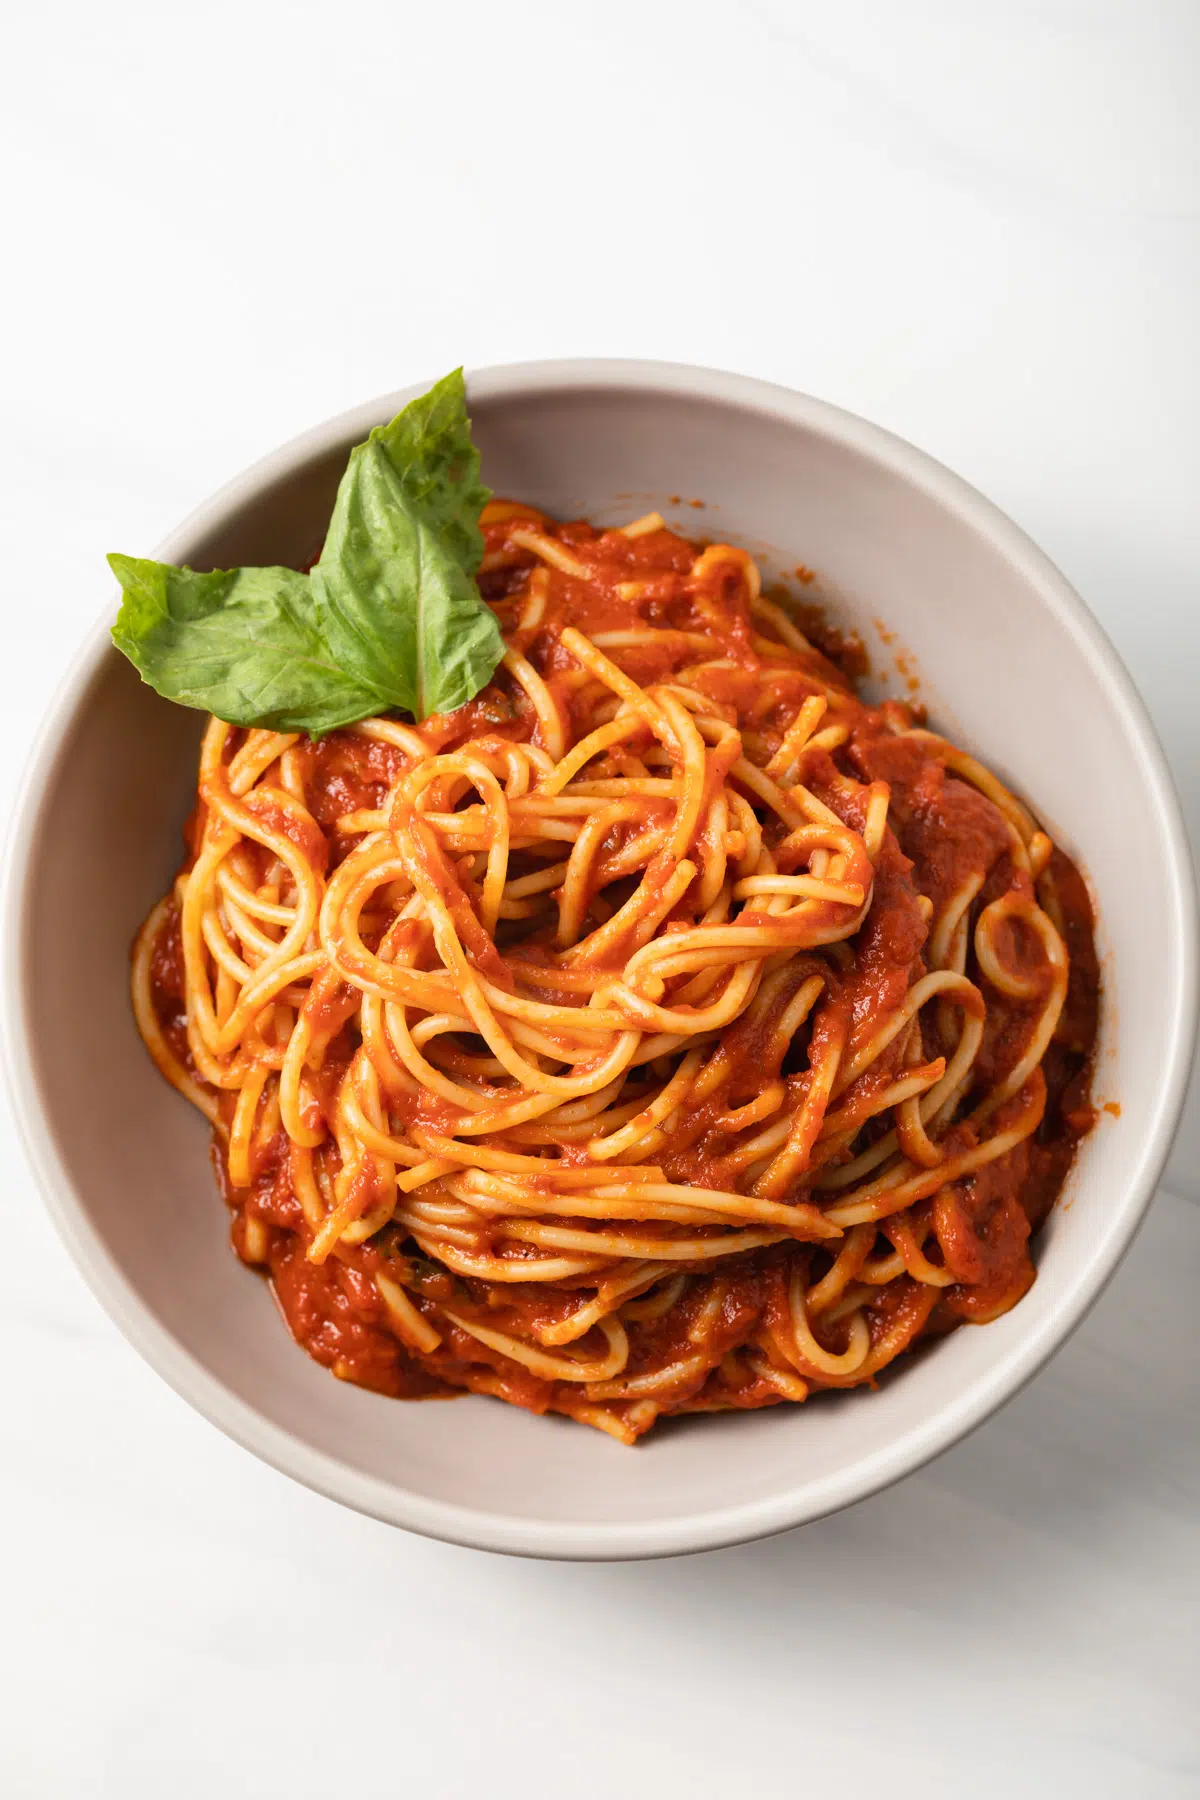 Overhead view of bowl of pasta coated in pomodoro sauce.